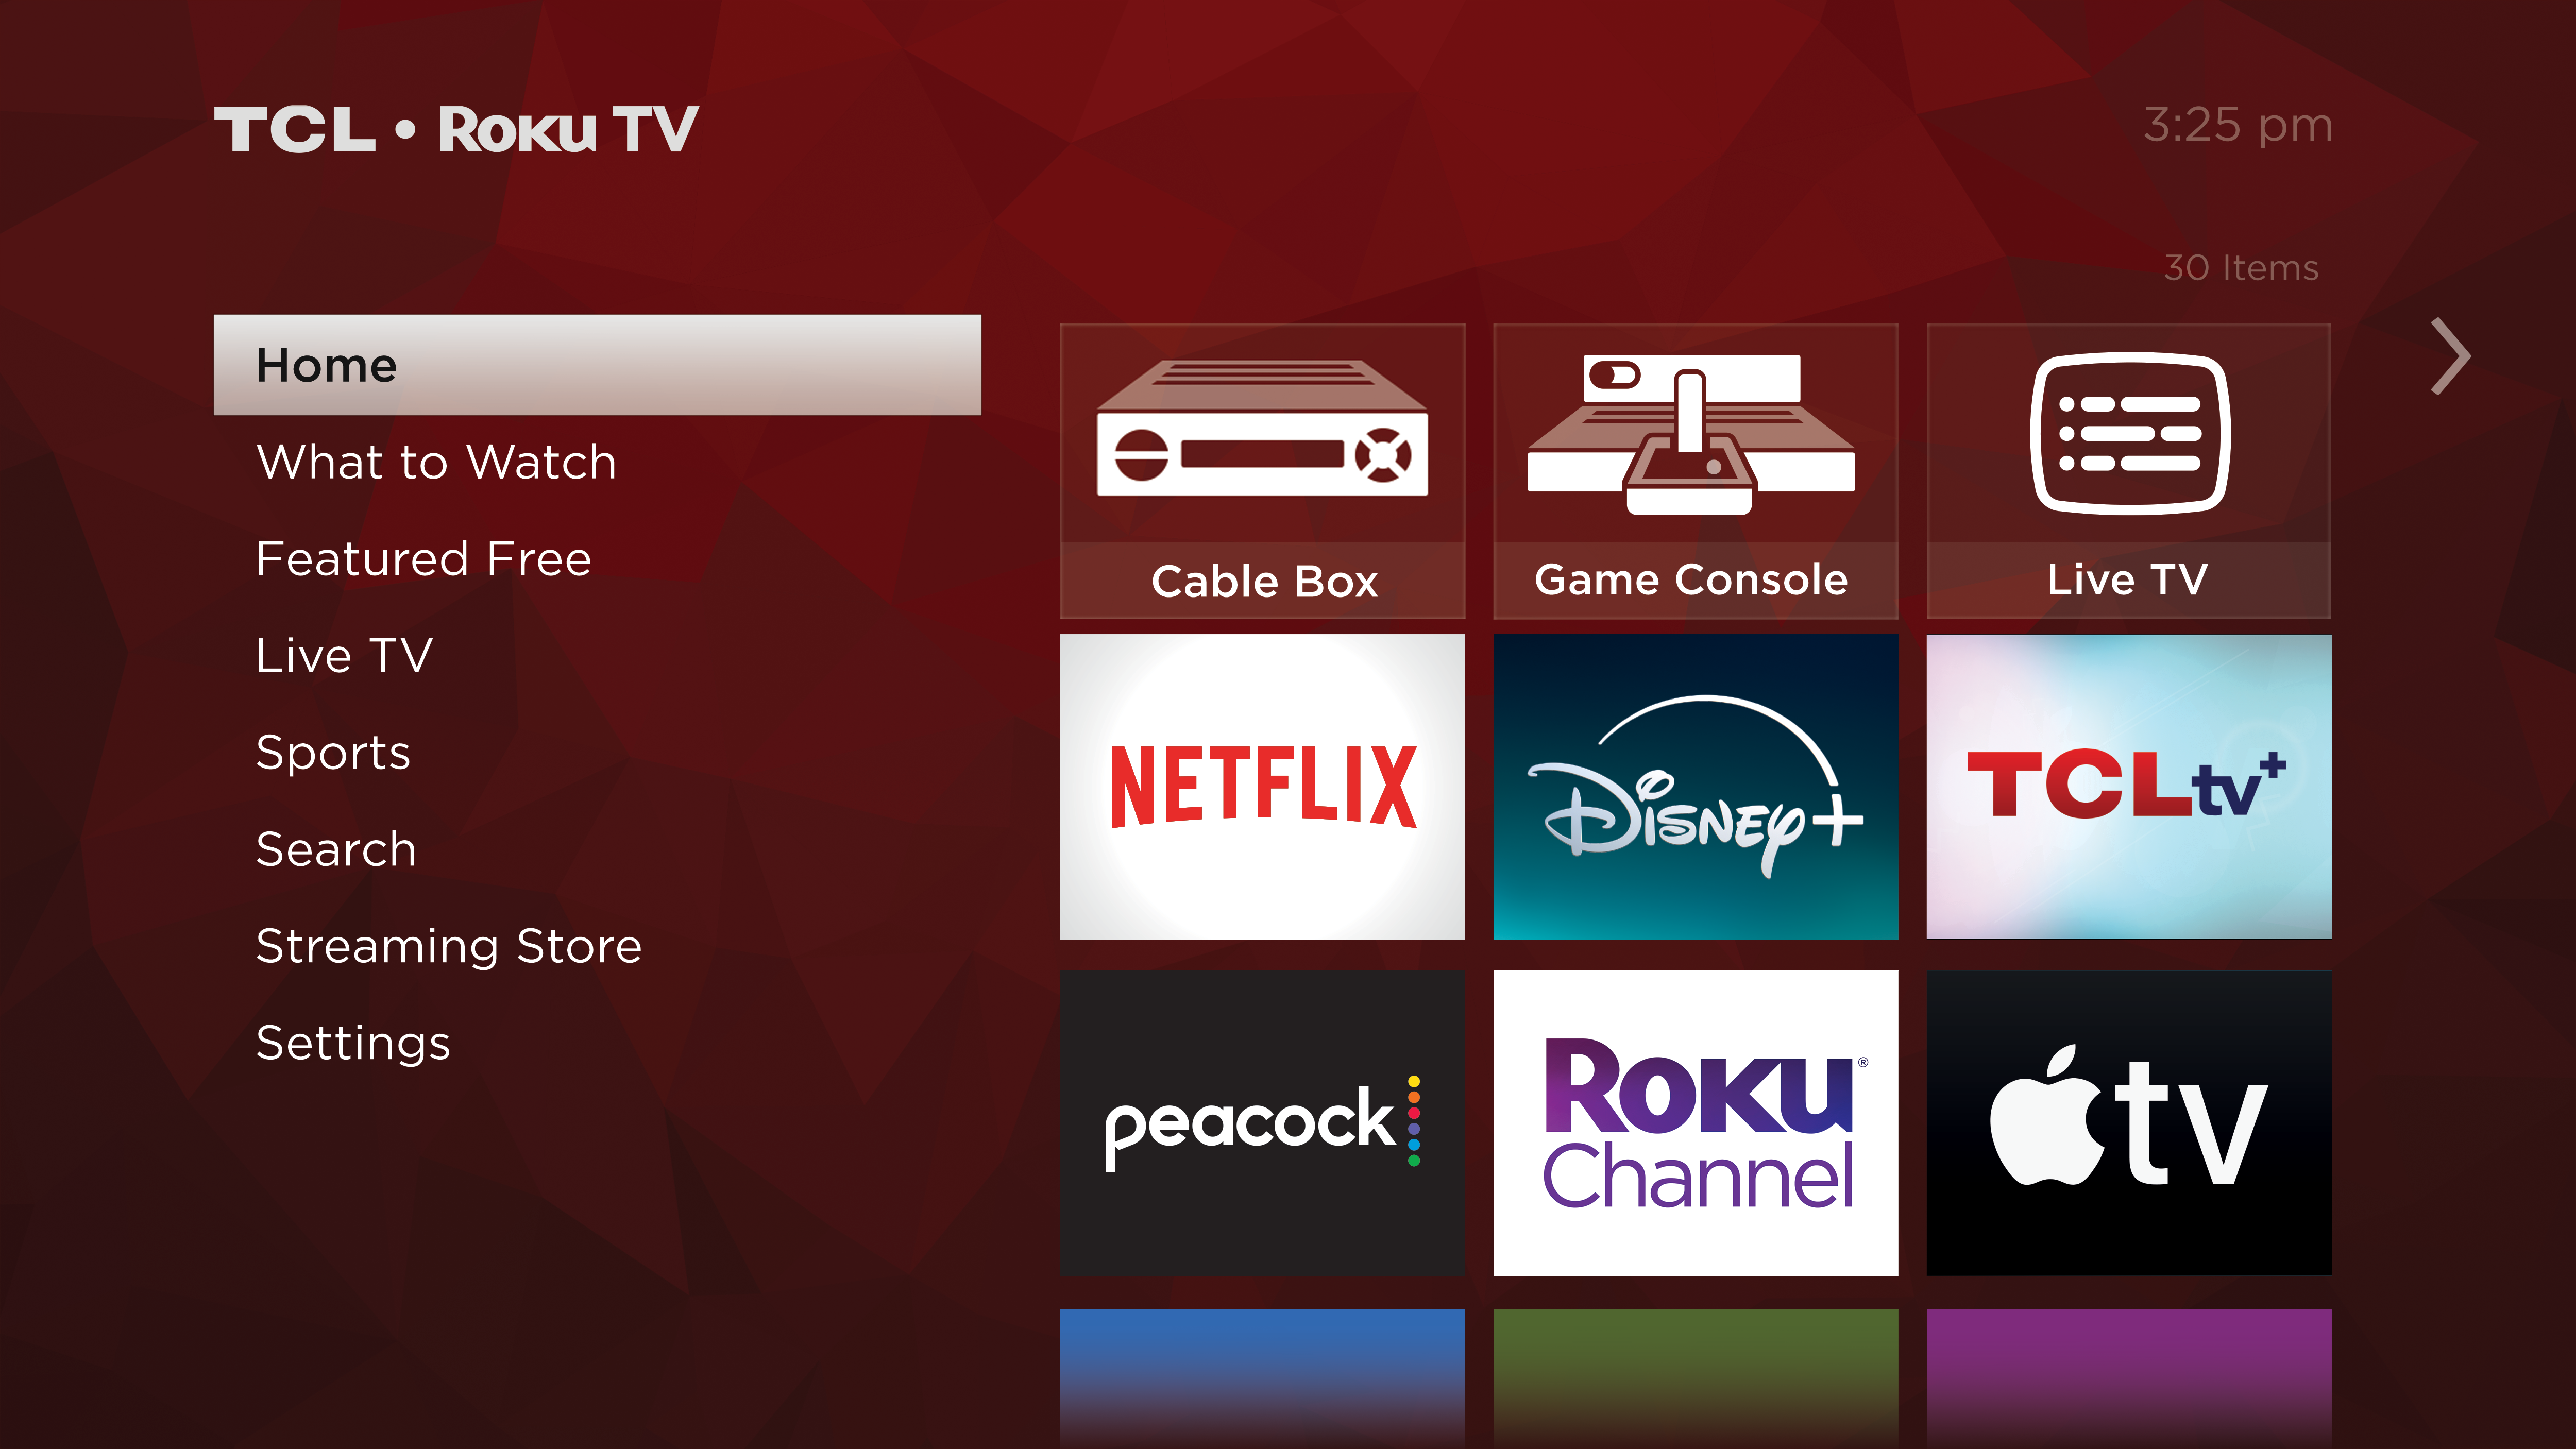 A New Free Streaming Service Launches on TCL Roku TVs Called TCLtv+ With 350 Free Live Channels